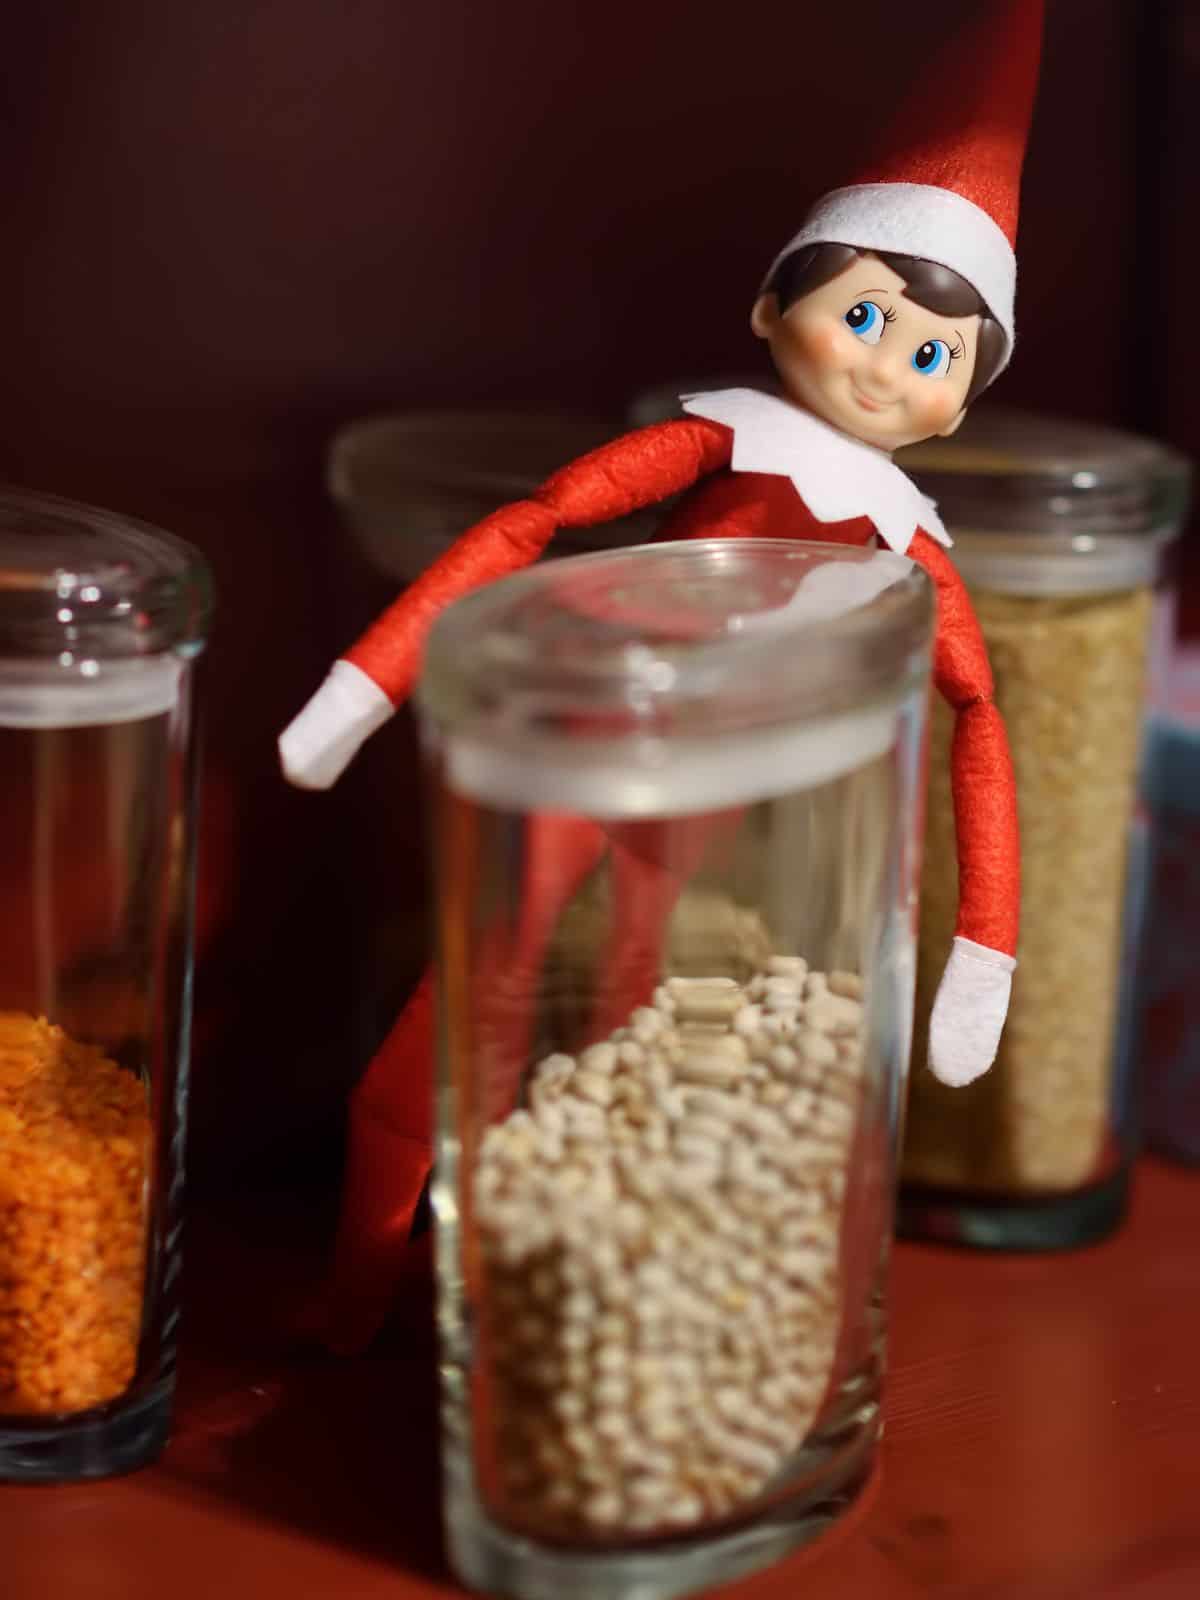 Elf on the shelf with food in pantry.